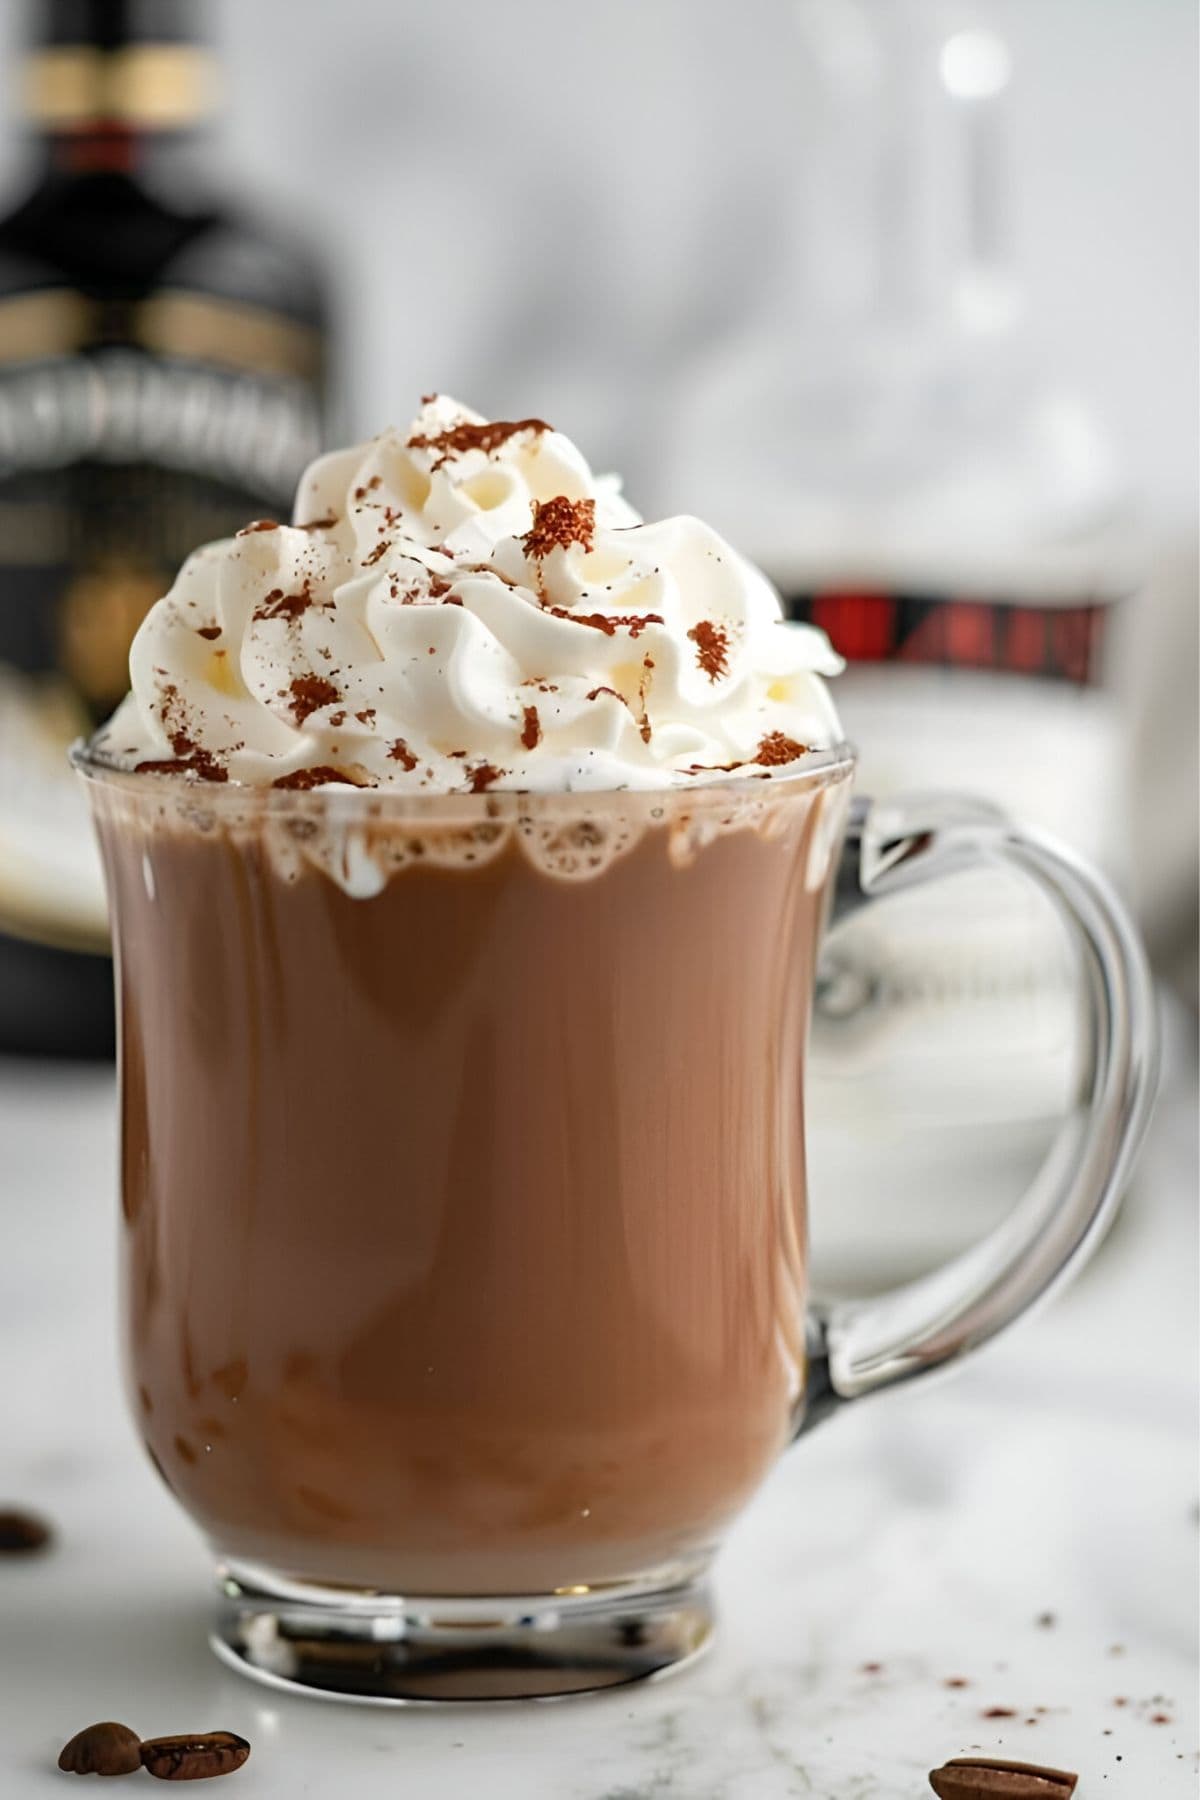 Glass Mug of Bailey's Hot Chocolate with Whipped Cream and Dusted with Cocoa Powder with a Bottle of Bailey's Irish Cream in the Background